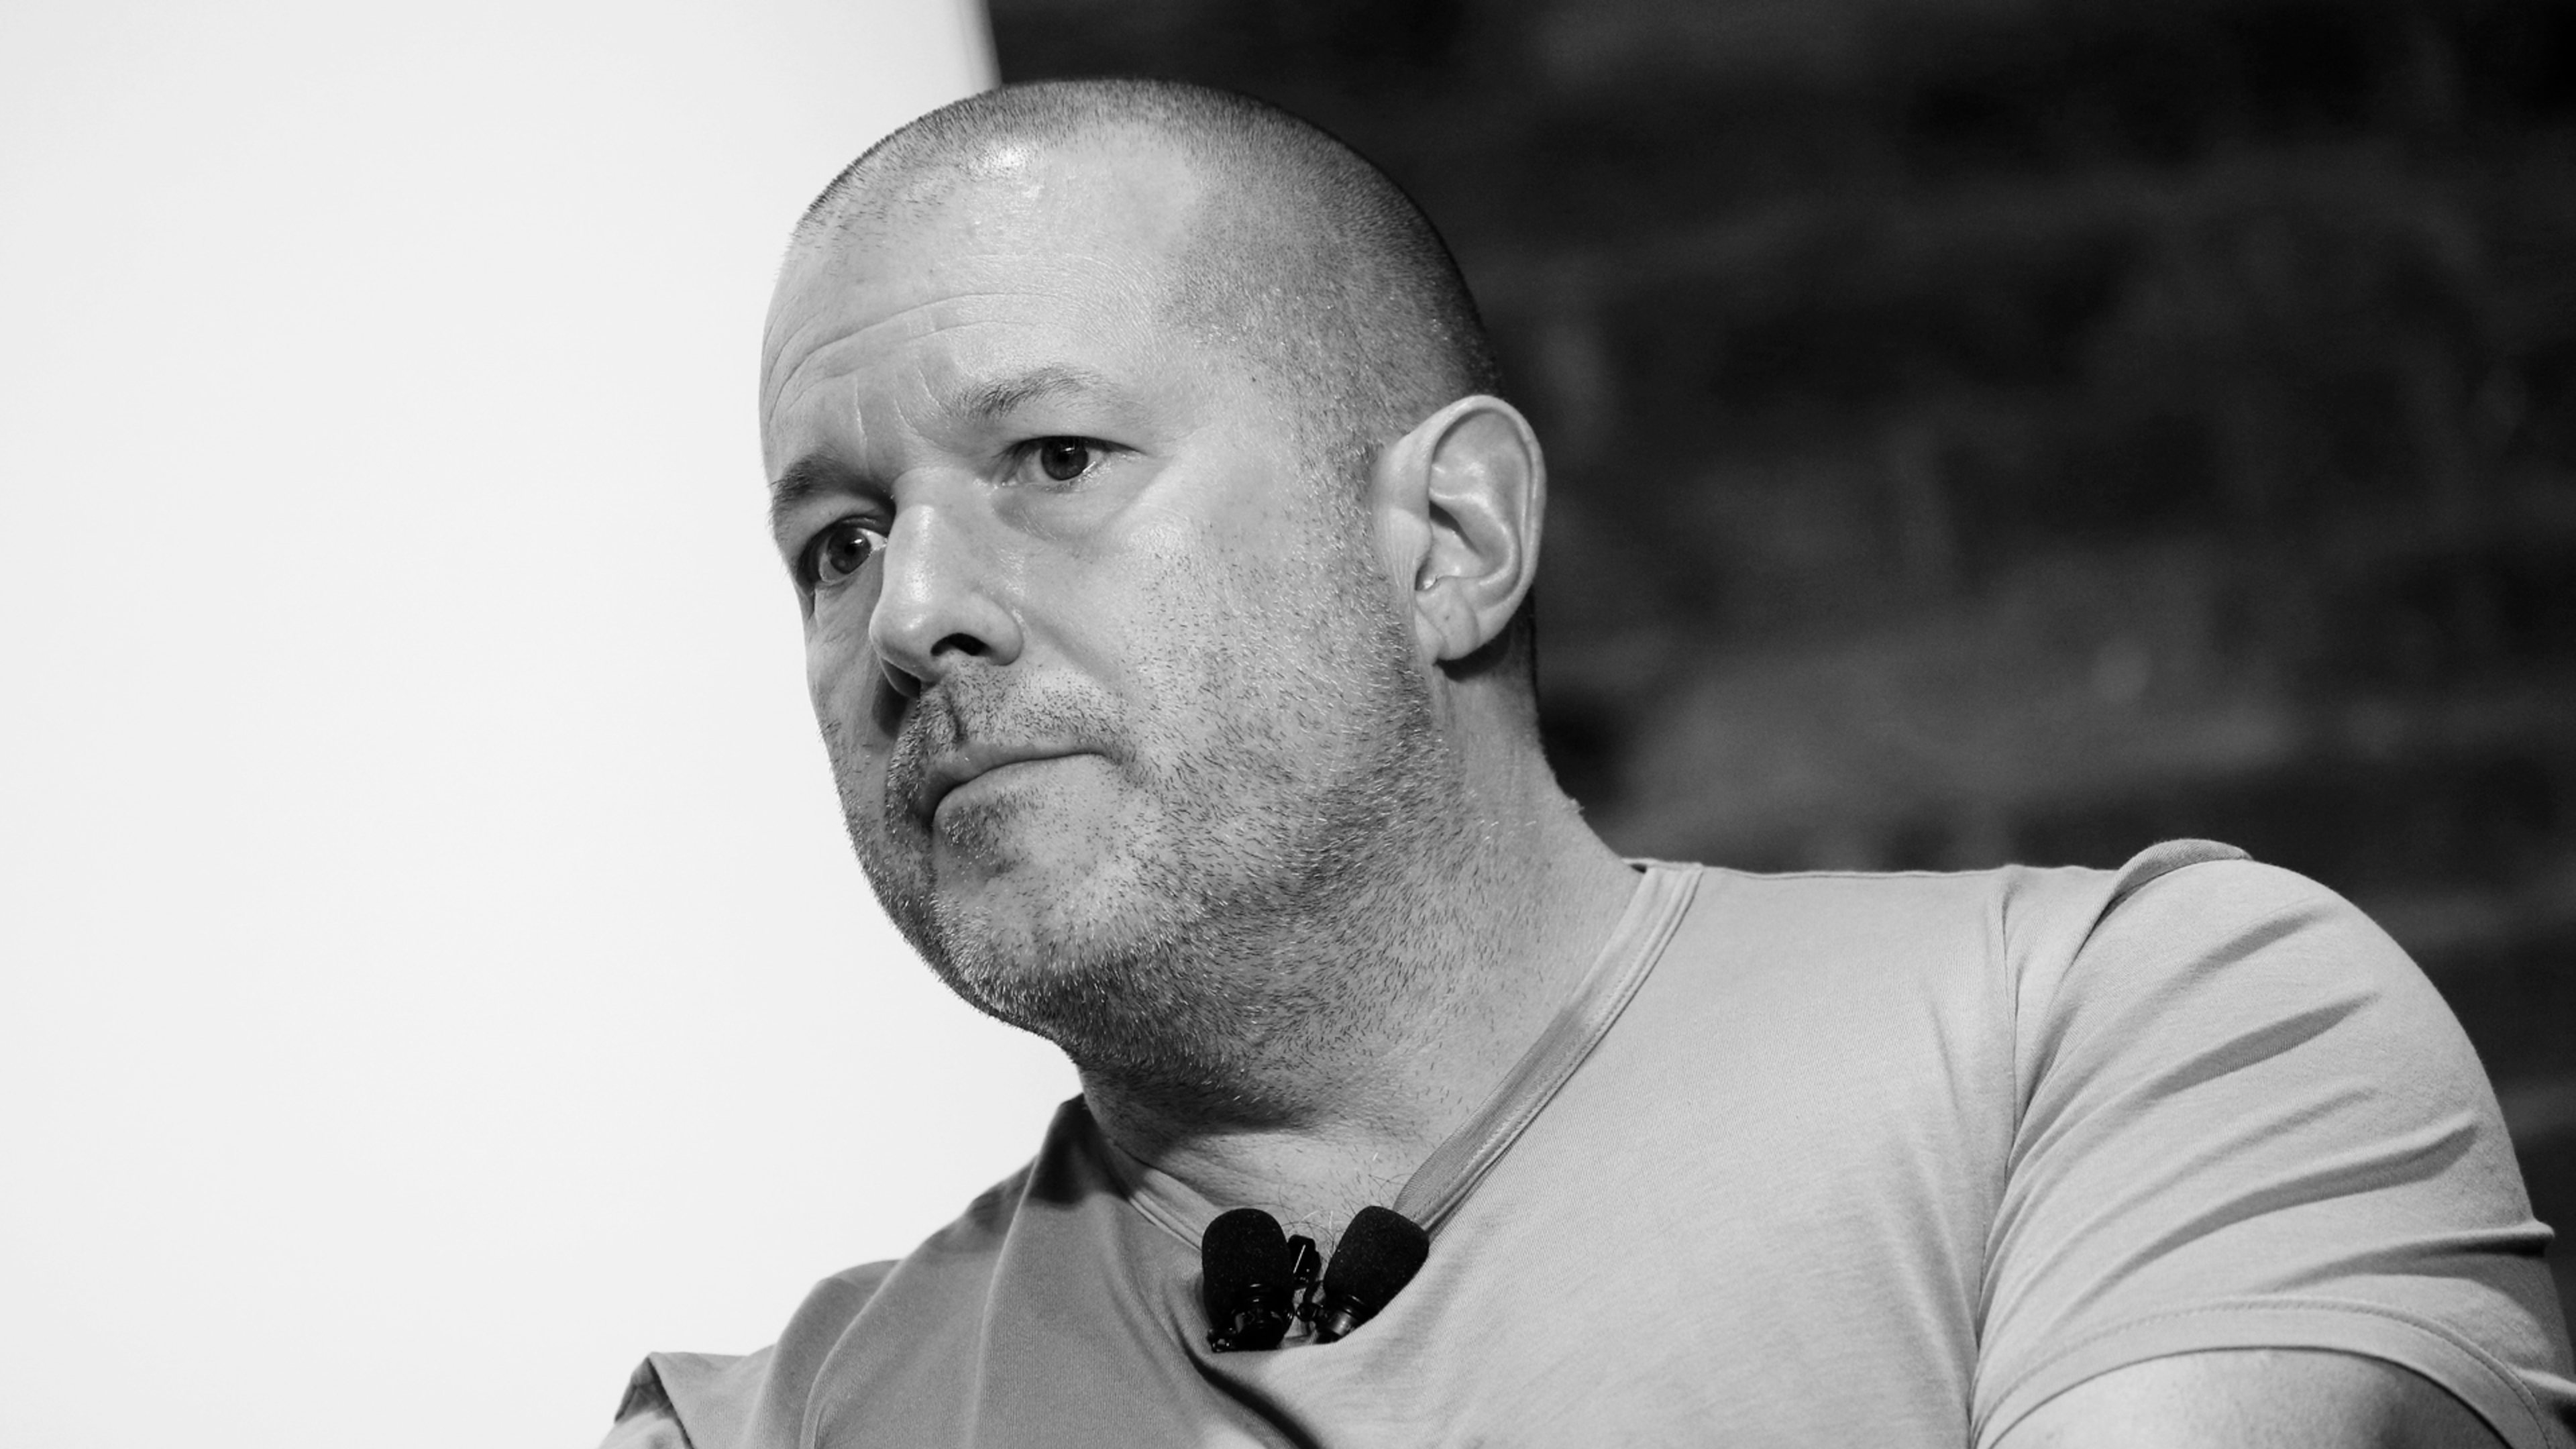 What Jony Ive’s exit really means for Apple, according to experts